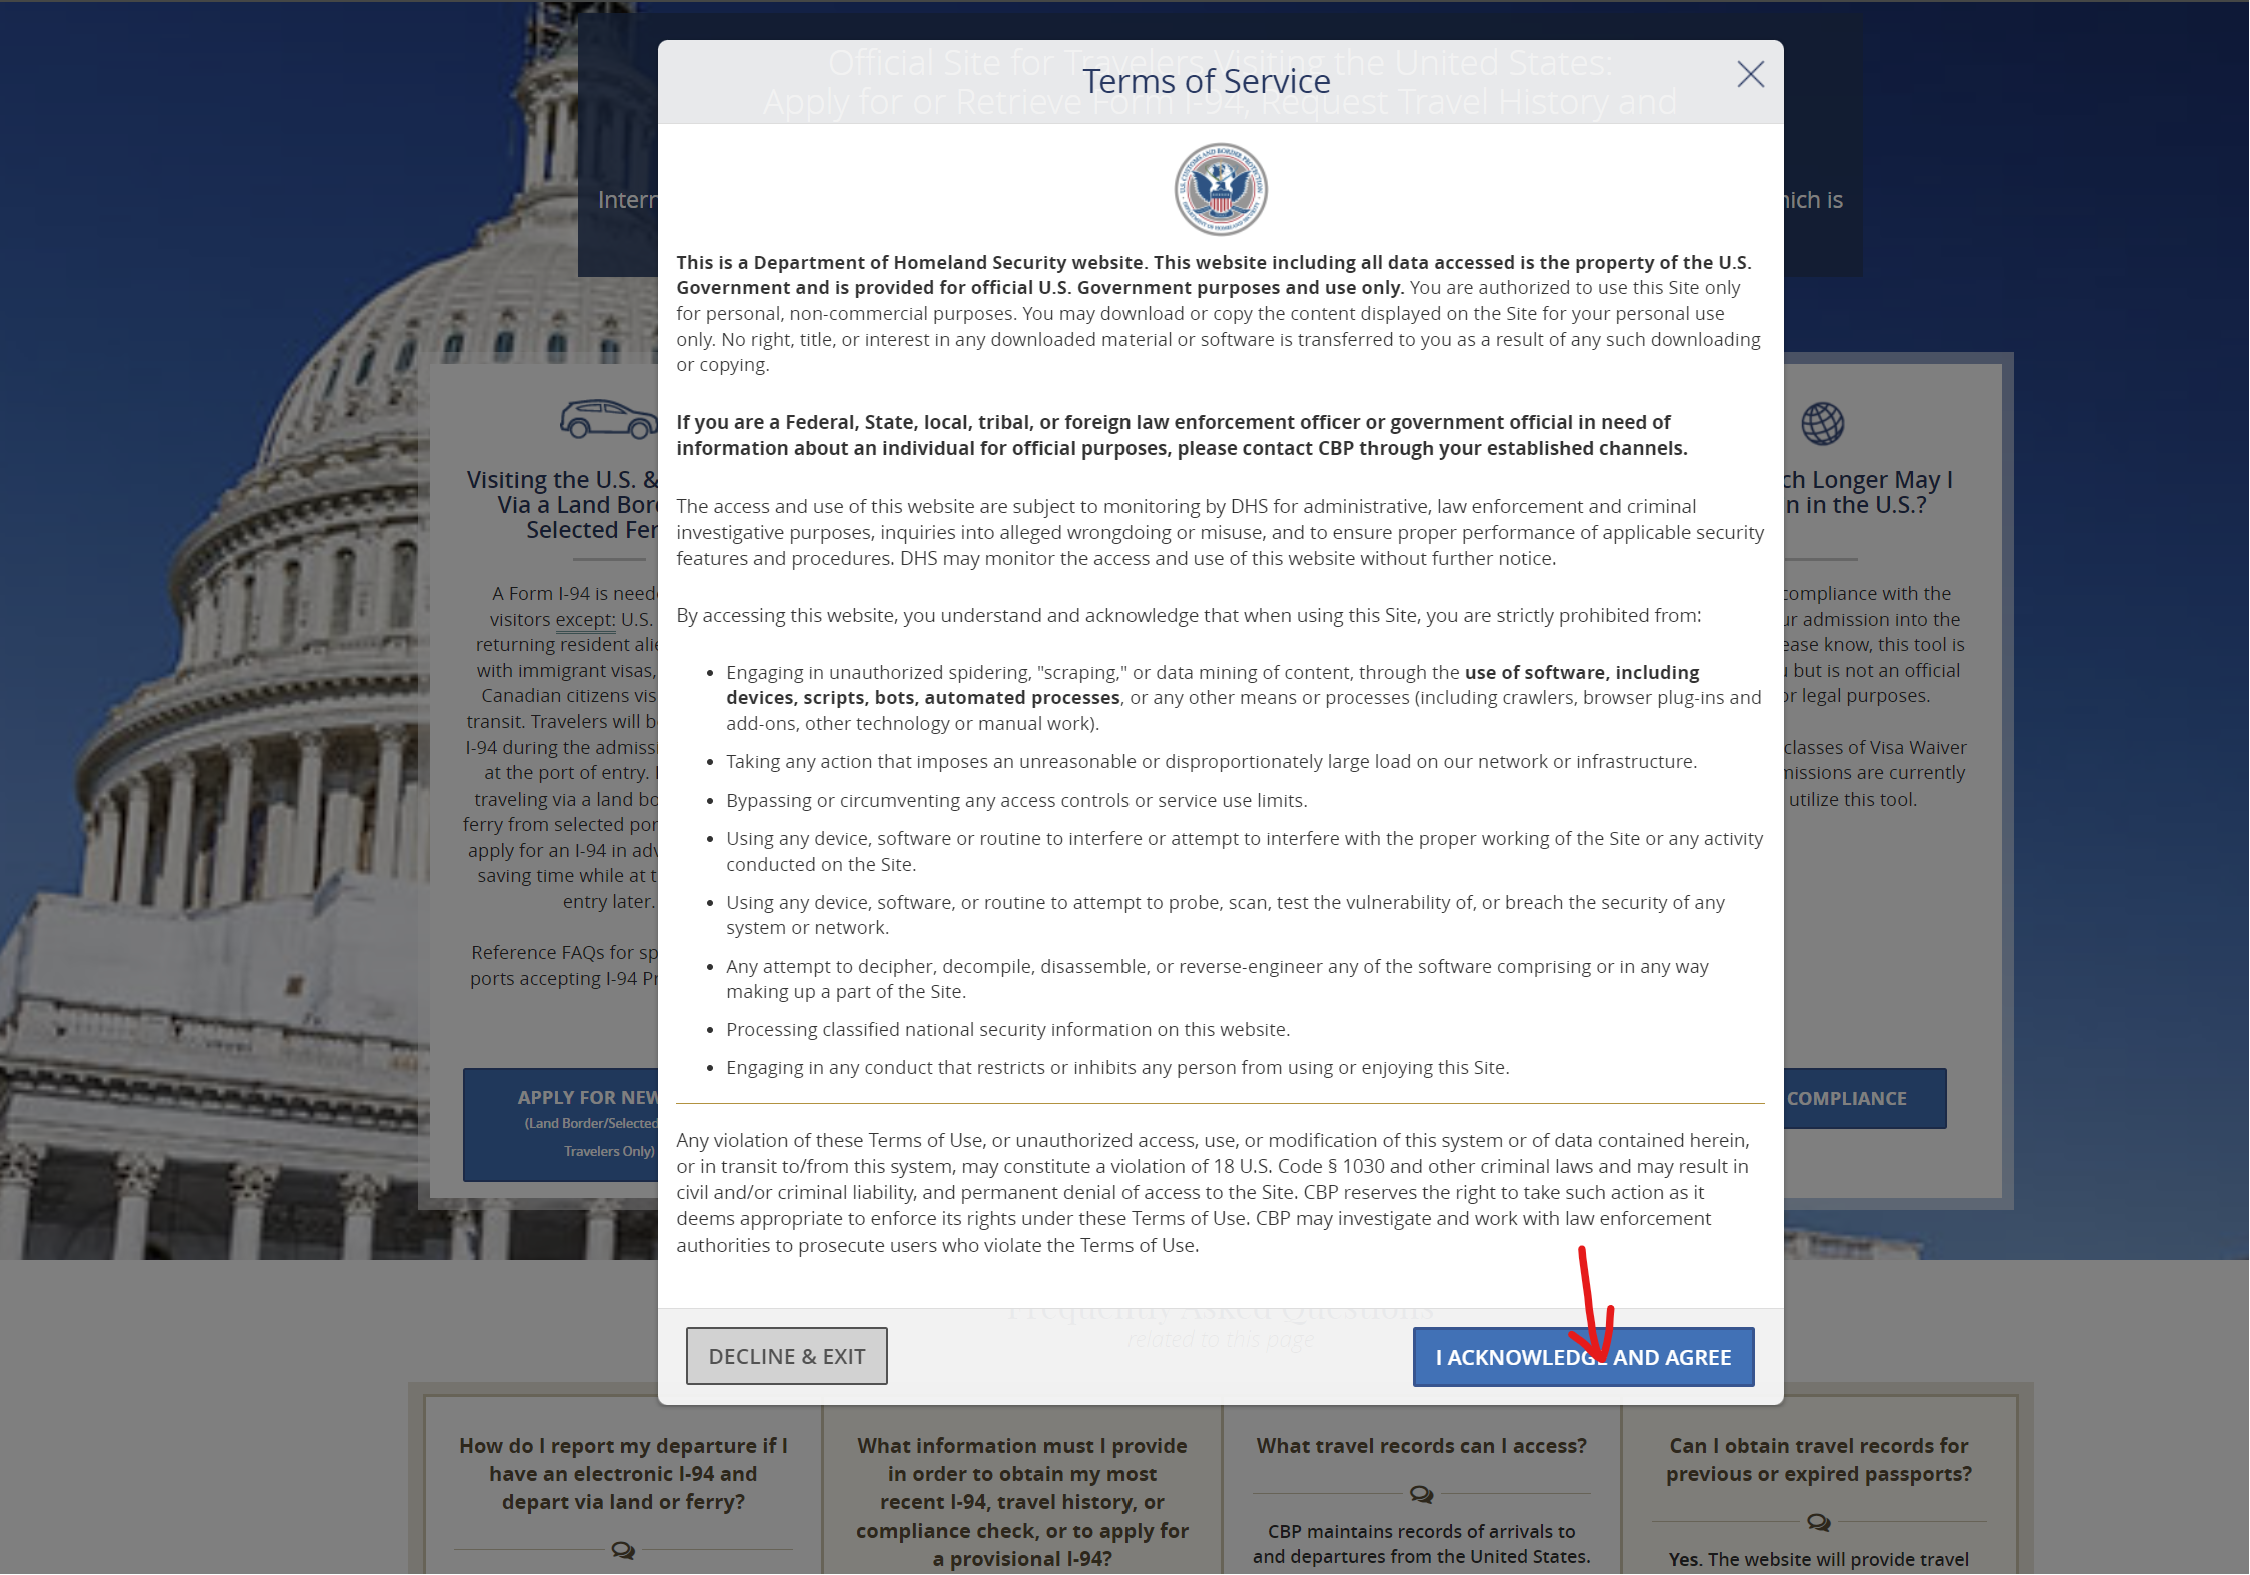 Screenshot of the Department of Homeland Security's website displaying the Terms of Service with an 'I Acknowledge and Agree' button.